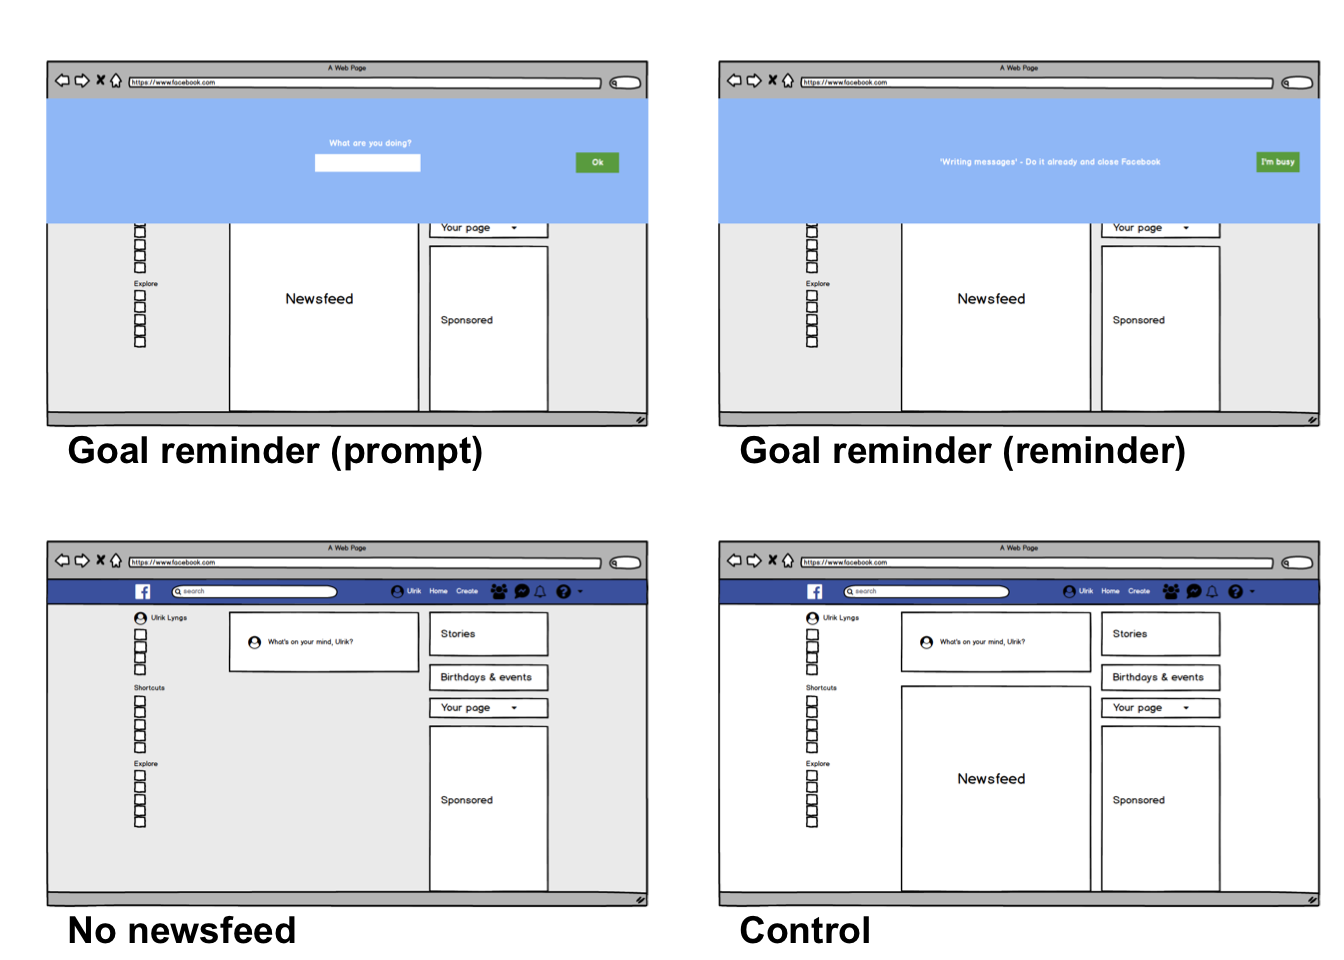 Mockup of study conditions: Cgoal (adding a goal prompt when visiting the site that every few minutes pops up a reminder), Cno-feed (removing the newsfeed), and Ccontrol (white background). Screenshots are available on osf.io/qtg7h.